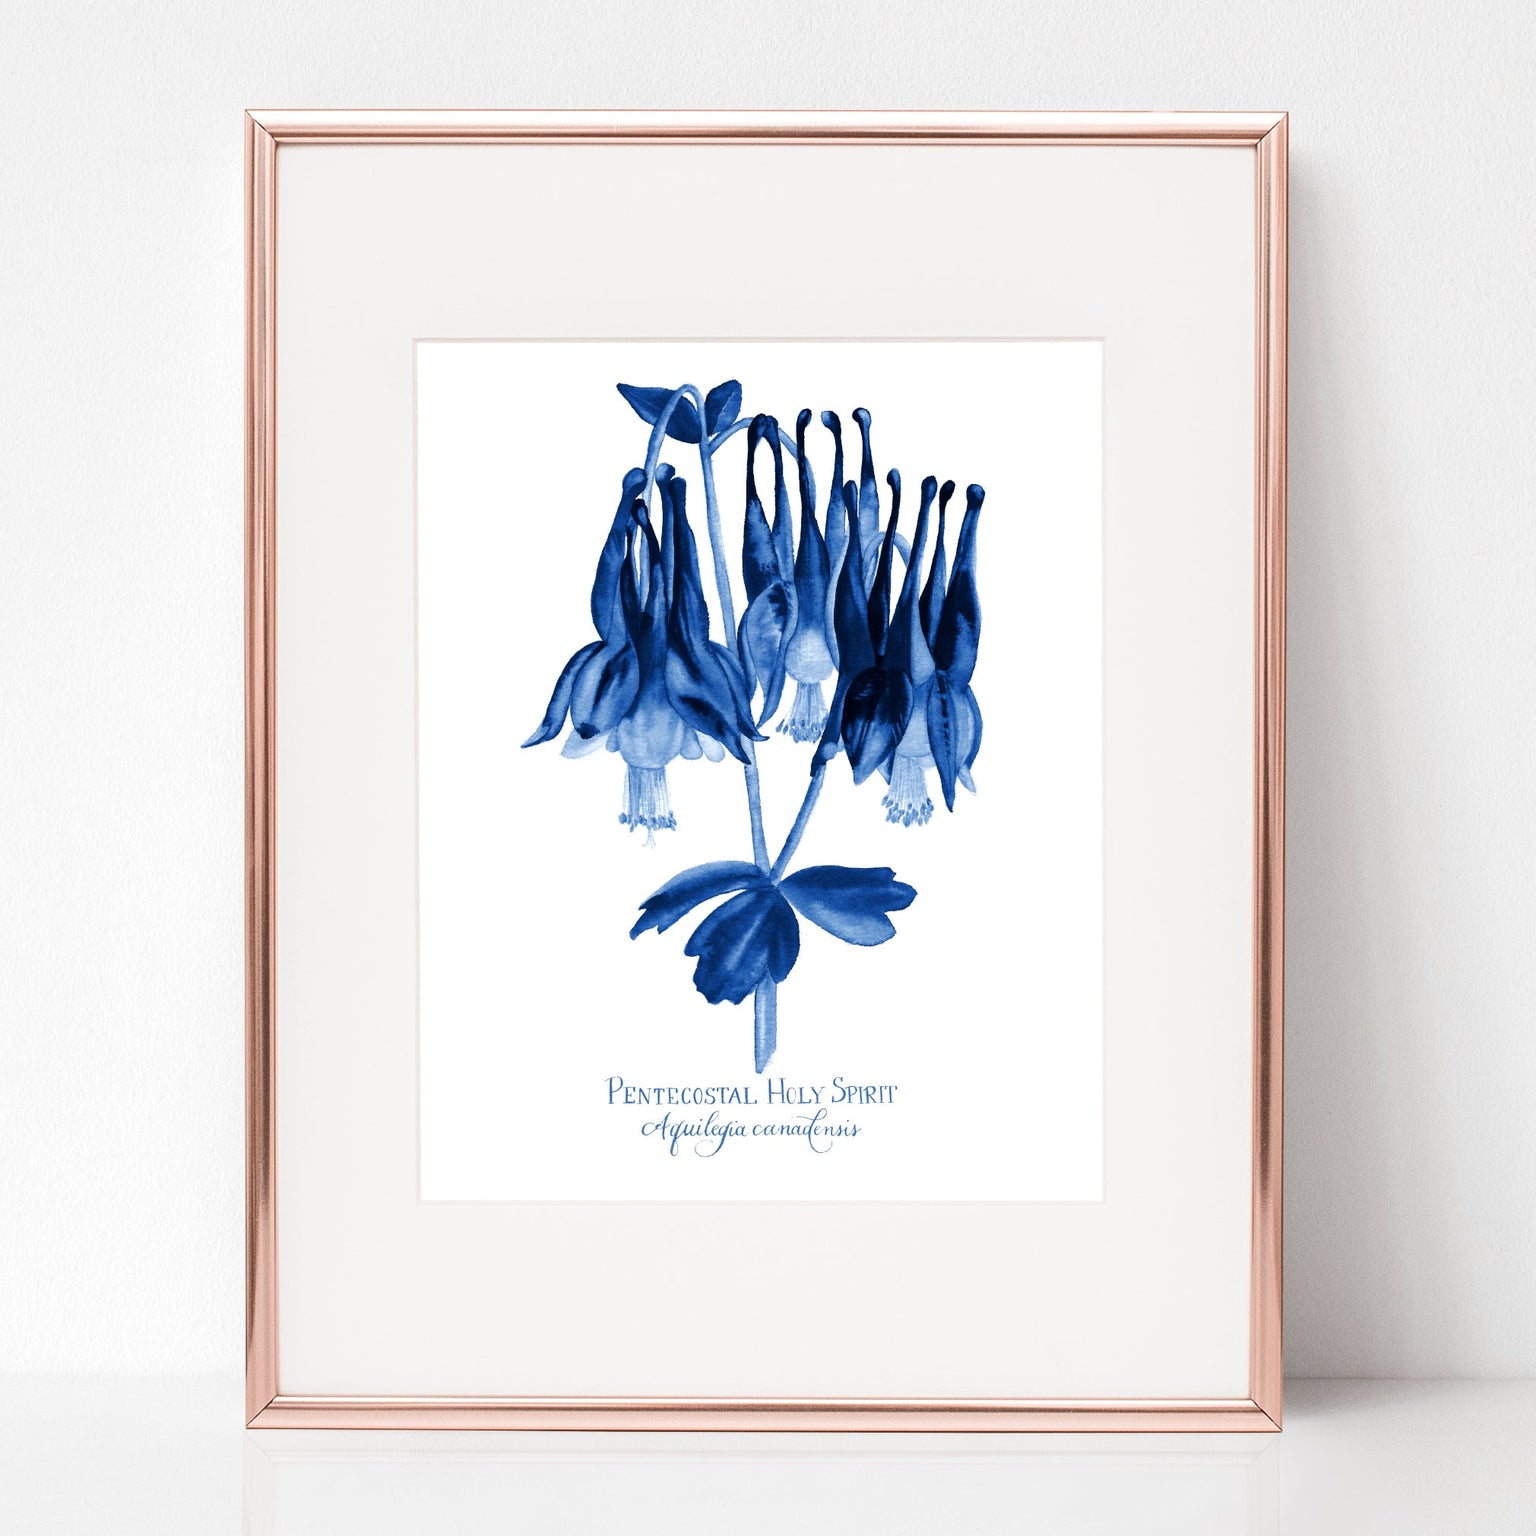 The Descent of the Holy Spirit, Pentecostal Holy Spirit, Aquilegia canadensis Print in Blue